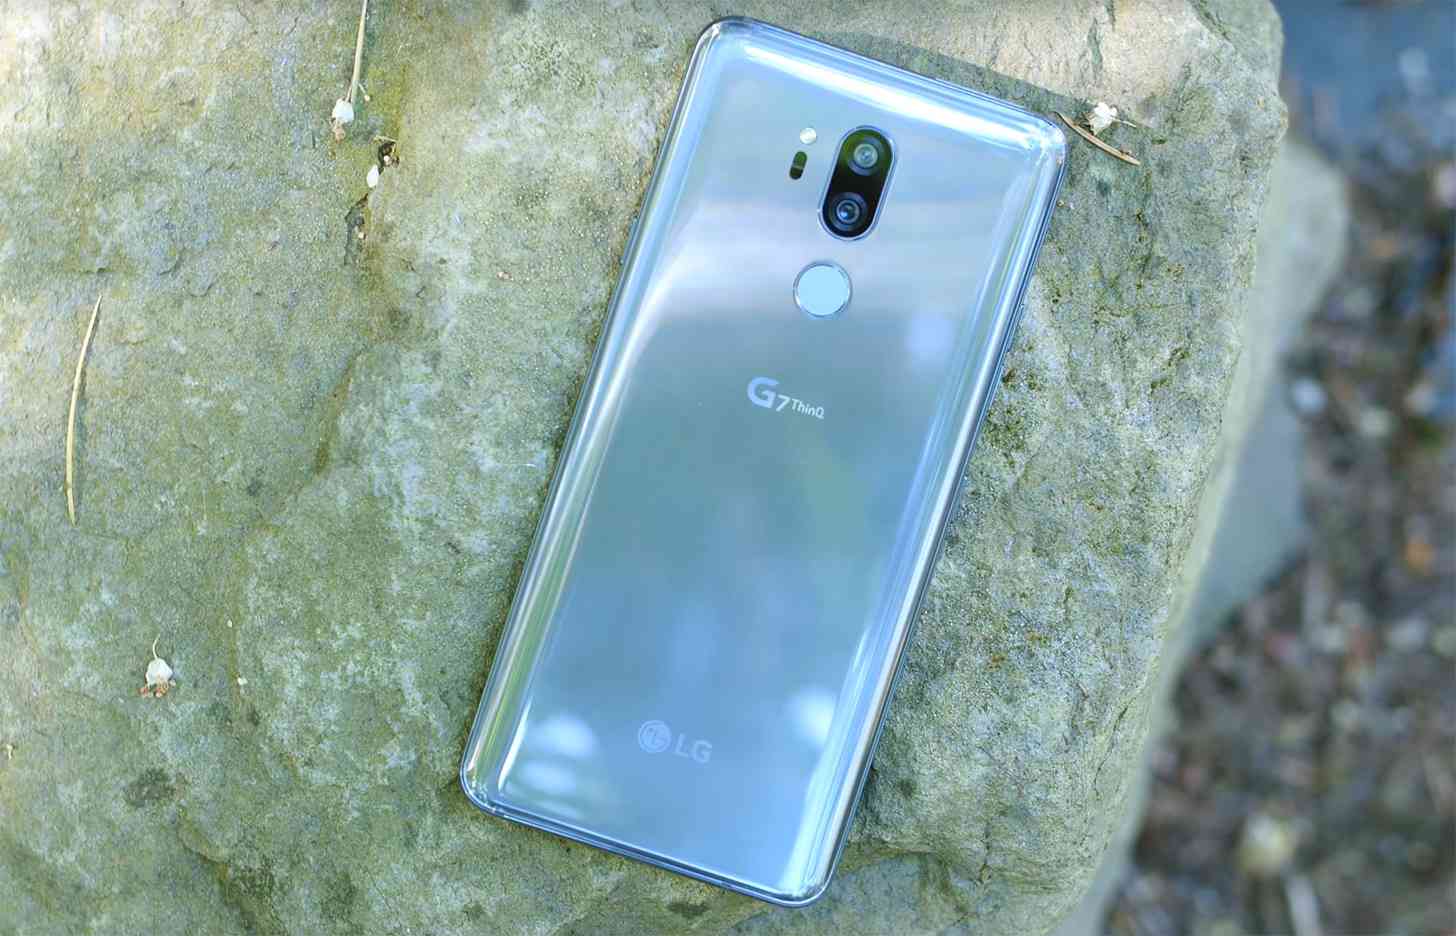 LG G7 ThinQ rear hands-on